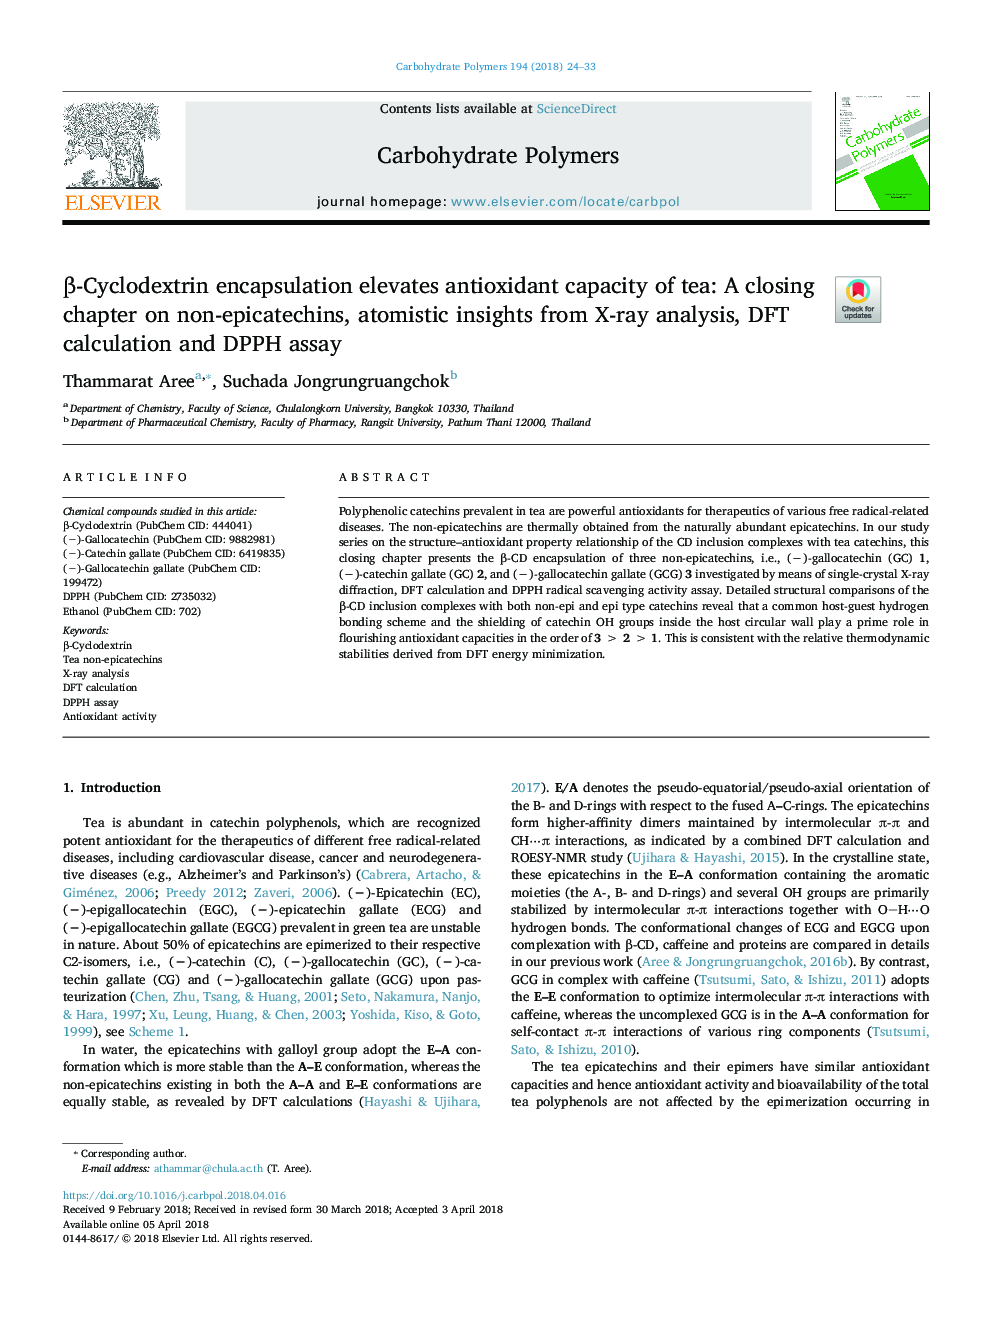 Î²-Cyclodextrin encapsulation elevates antioxidant capacity of tea: A closing chapter on non-epicatechins, atomistic insights from X-ray analysis, DFT calculation and DPPH assay